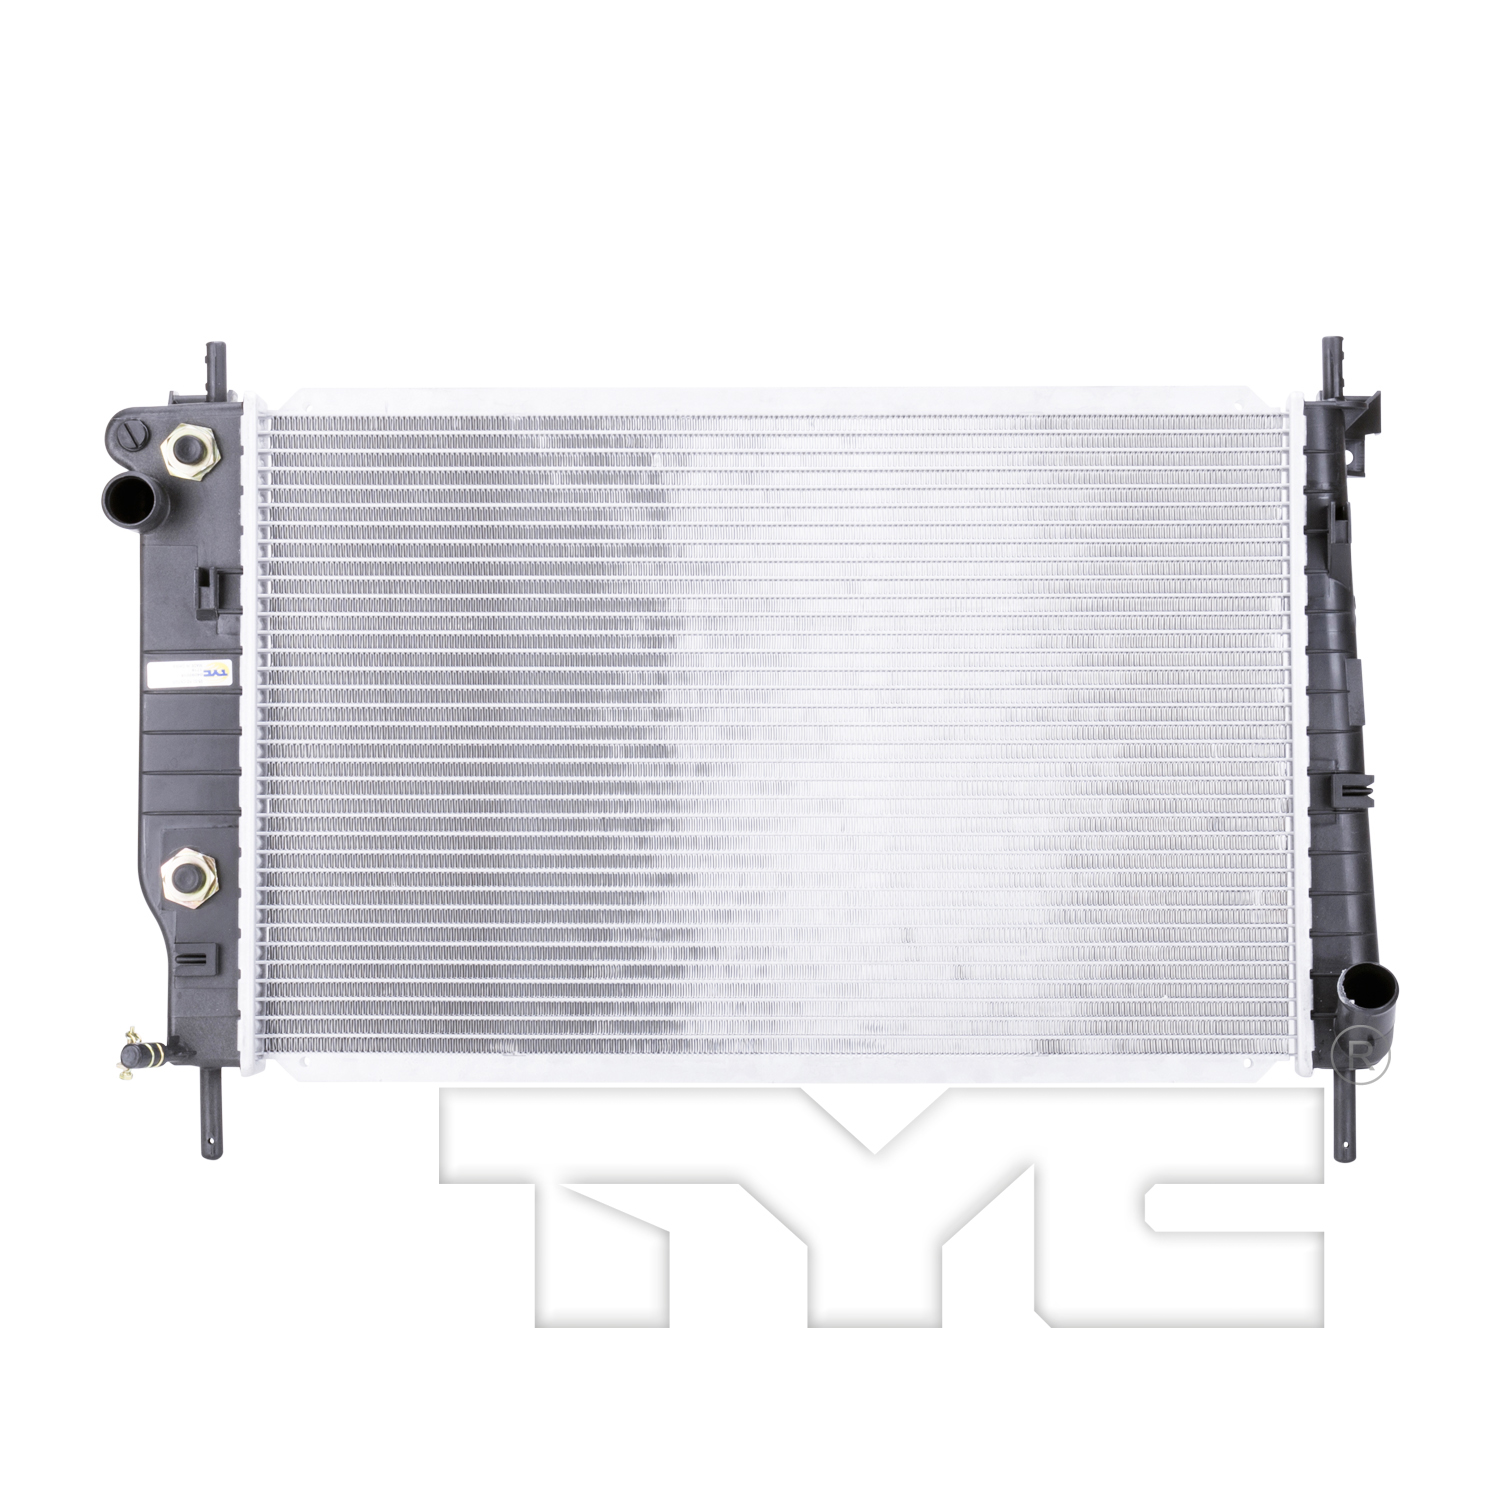 Aftermarket RADIATORS for FORD - CONTOUR, CONTOUR,95-00,Radiator assembly